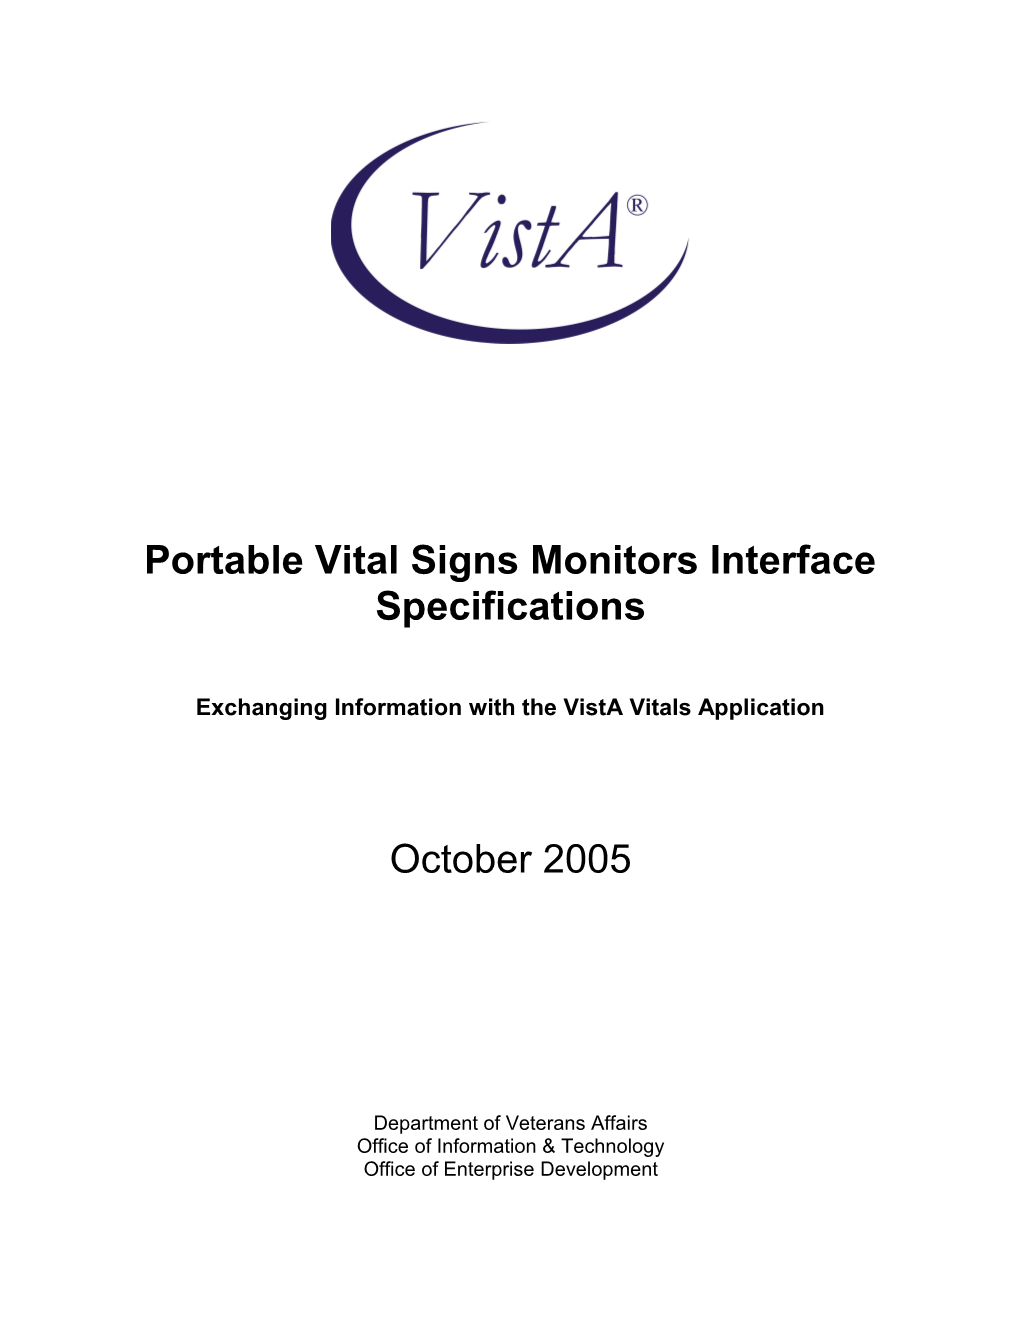 Portable Vitals Signs Monitors Interface Specification